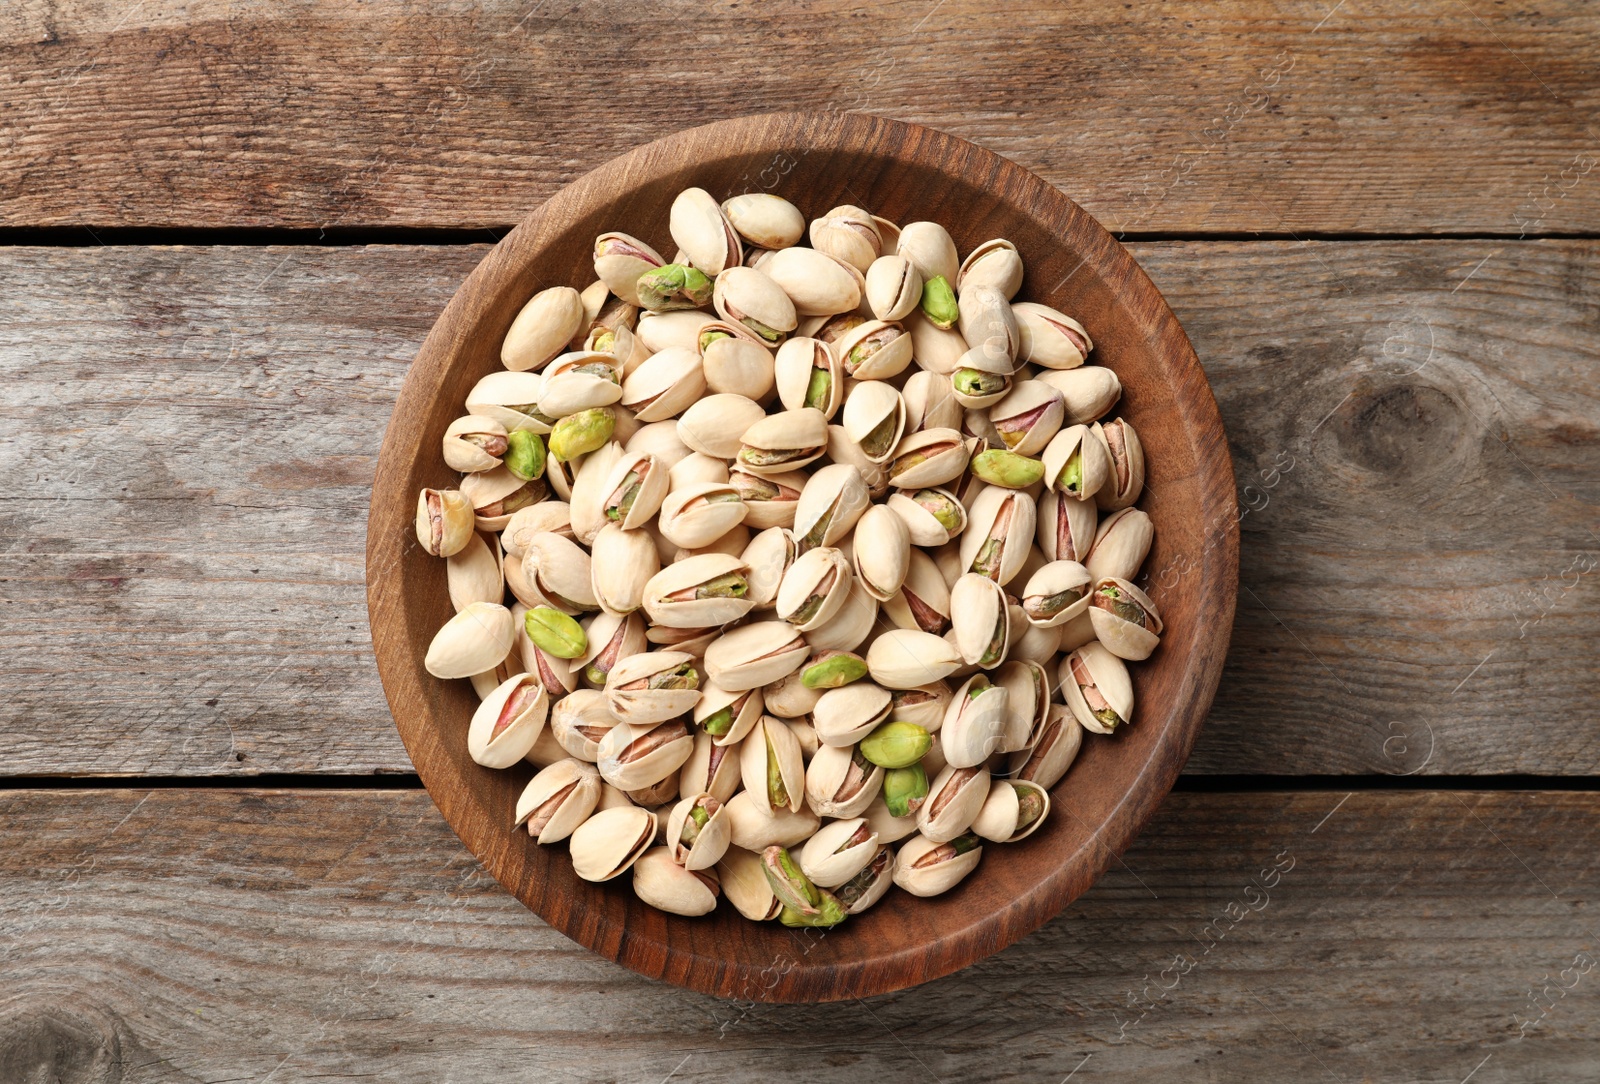 Photo of Organic pistachio nuts in bowl on wooden table, top view